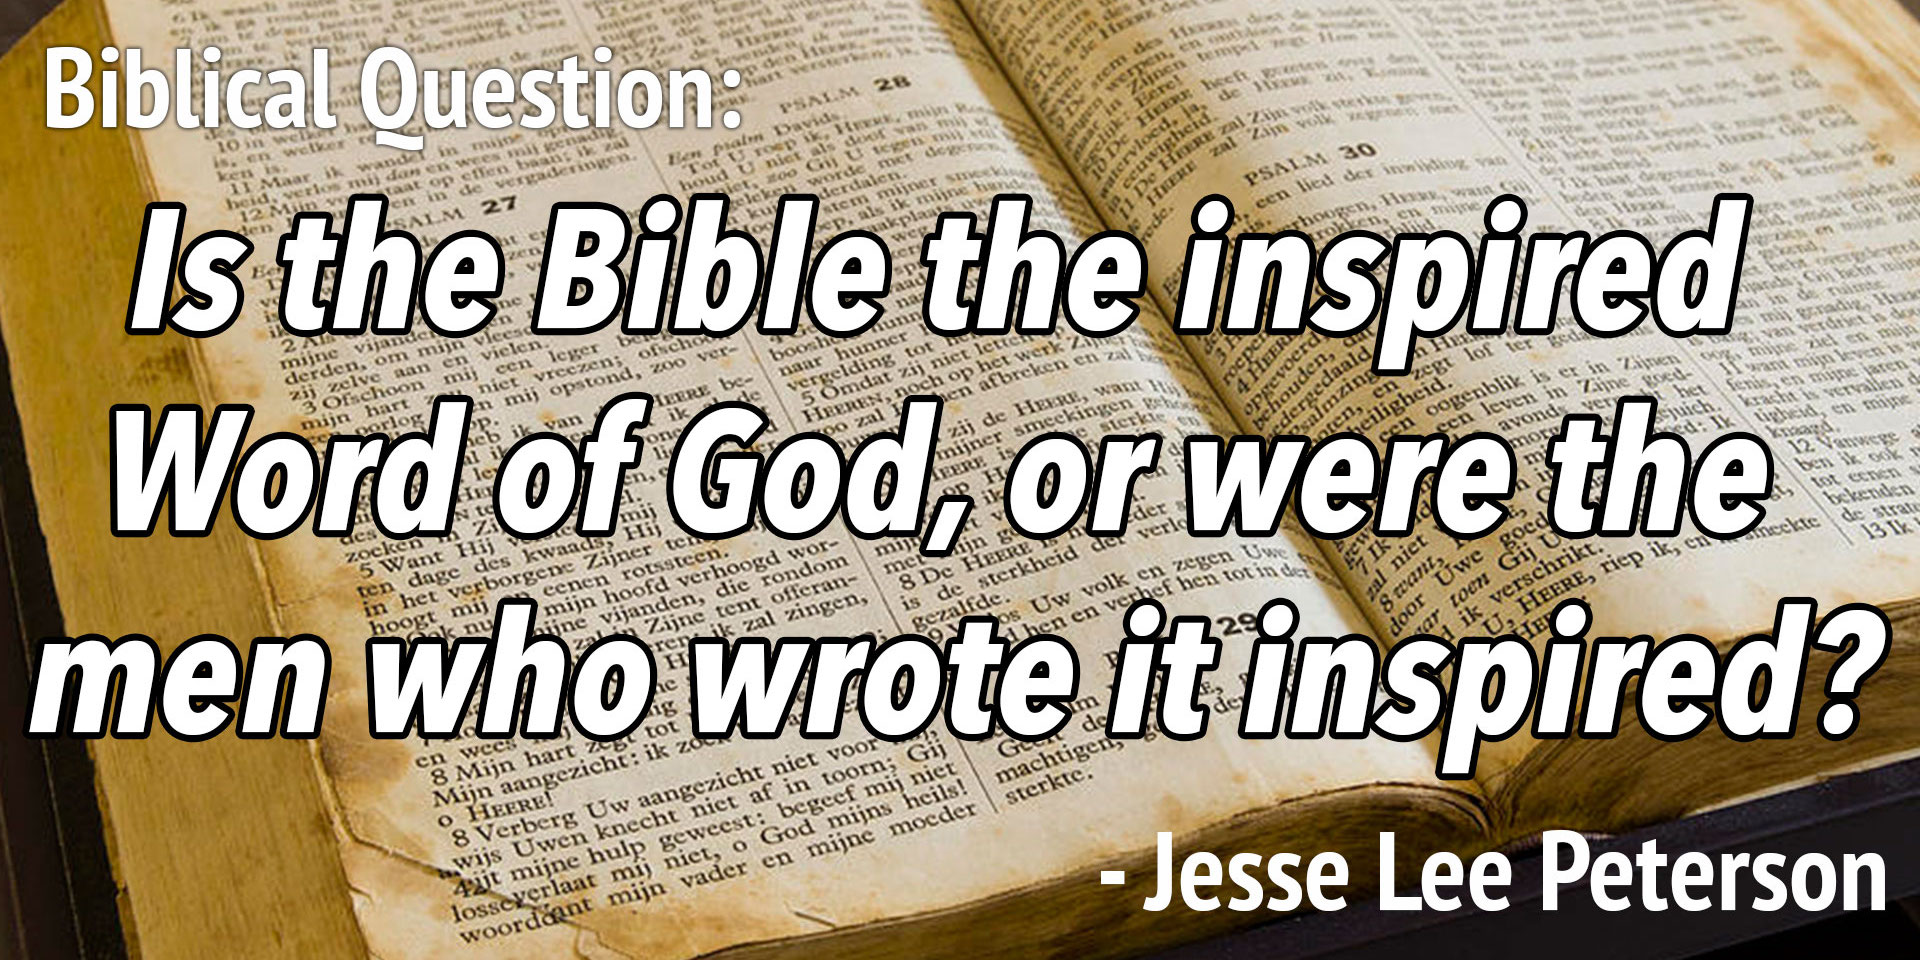 Biblical Question: Is the Bible the inspired Word of God?